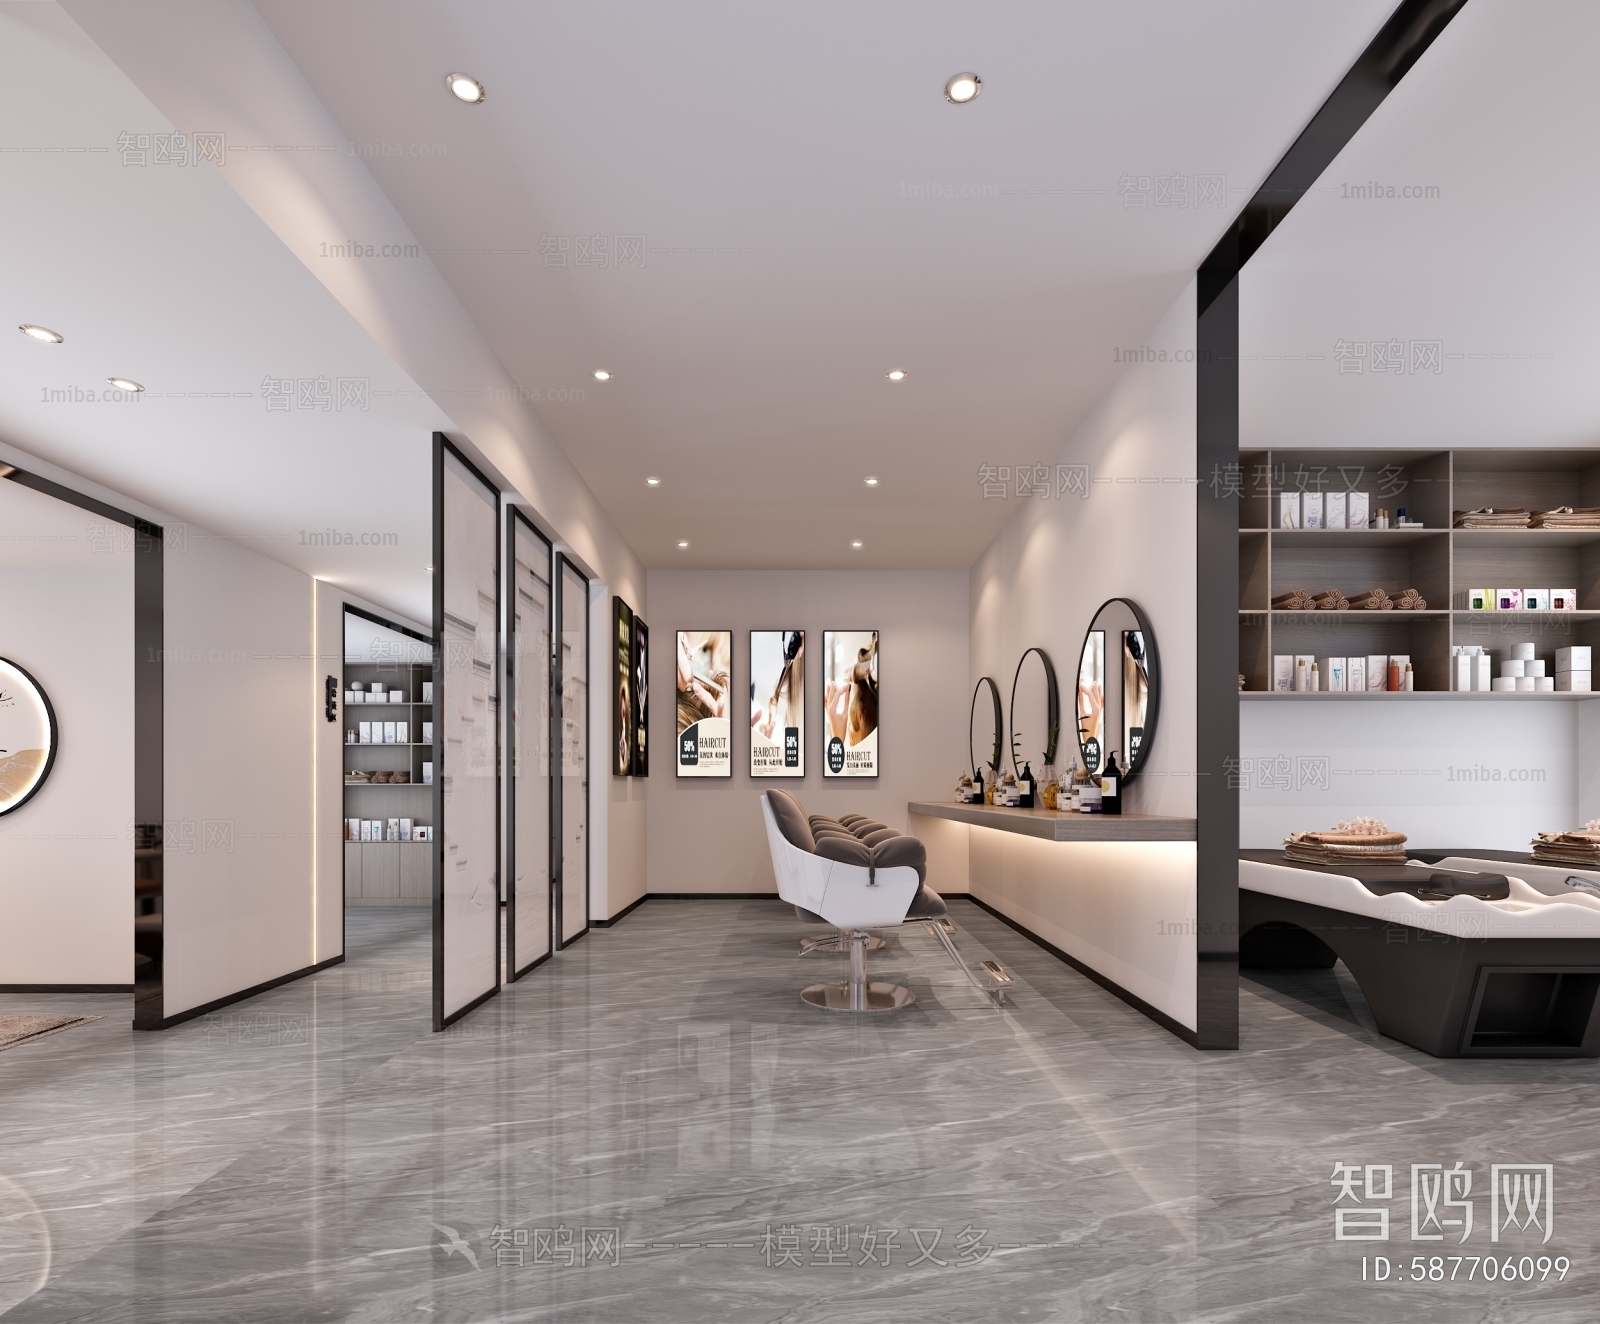 Modern Beauty And Hairdressing